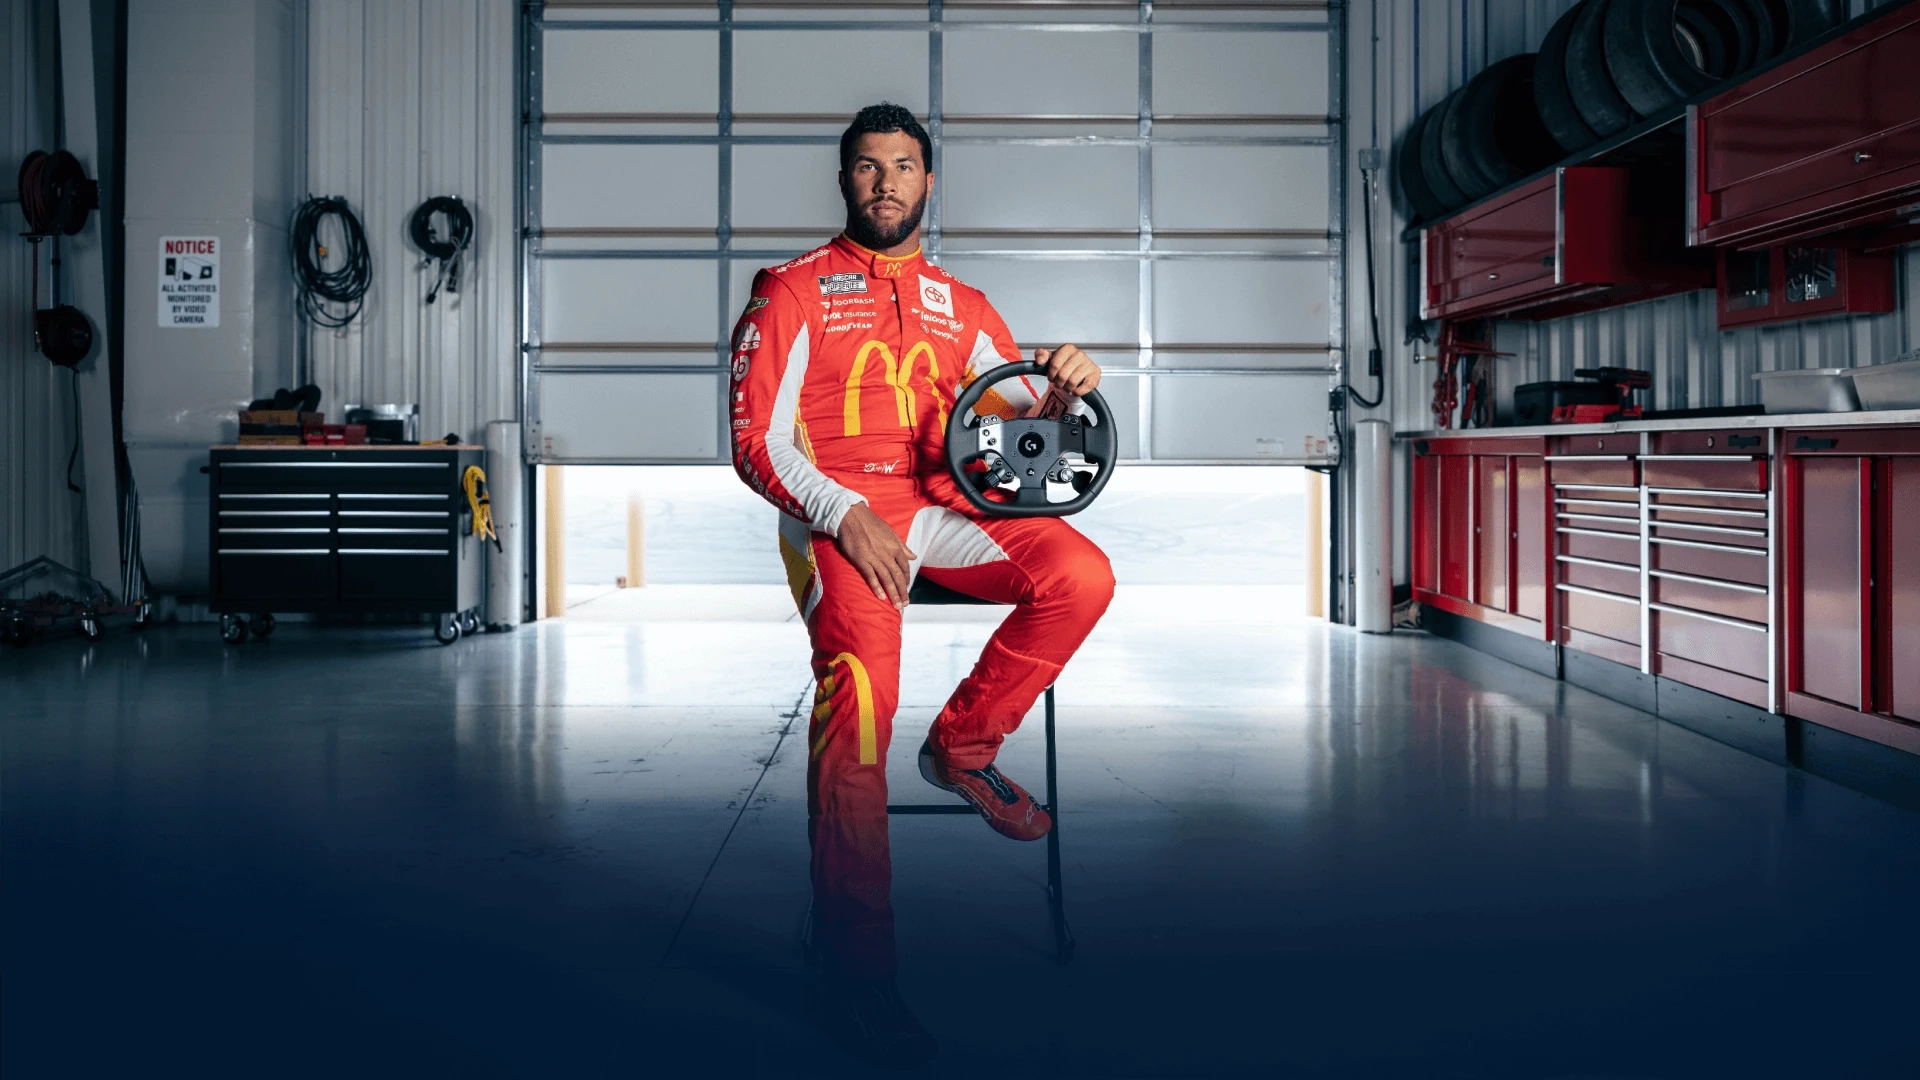 Professional stock car driver William Darrell “Bubba” Wallace wears his red racing uniform and sits on a stool in a garage holding a Logitech G PRO Wheel.